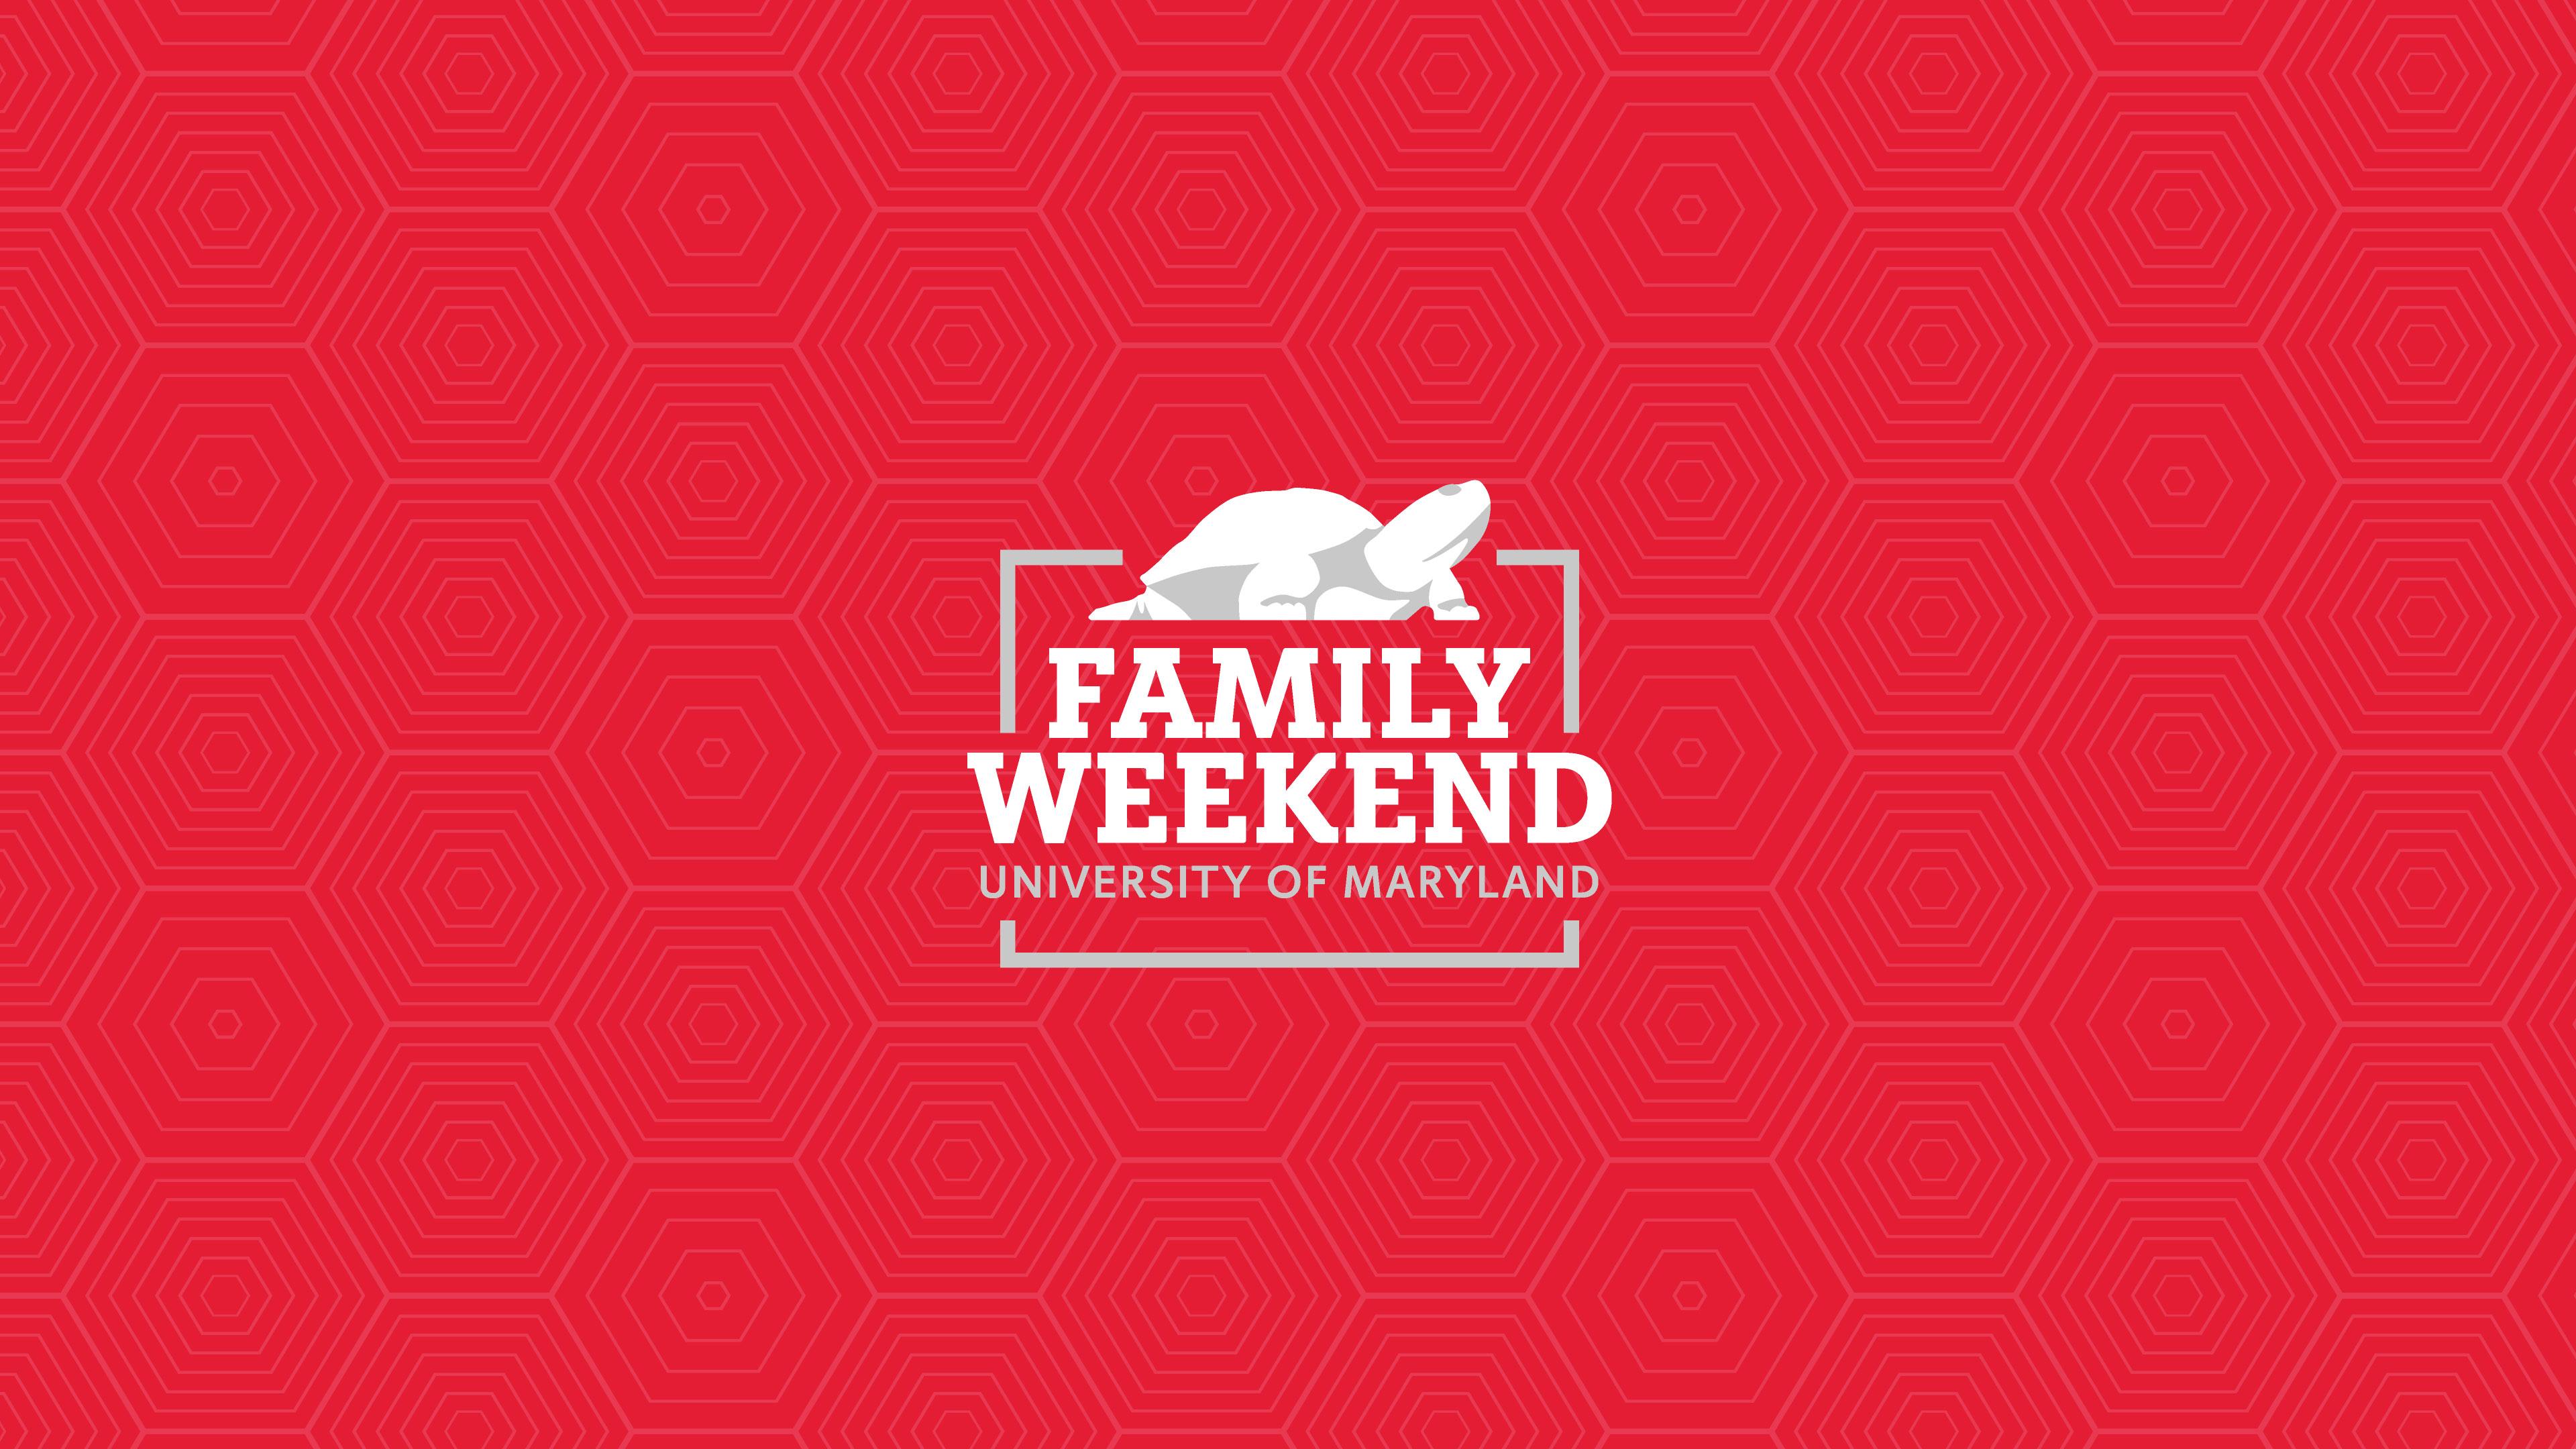 Family Weekend logo with a red shell background